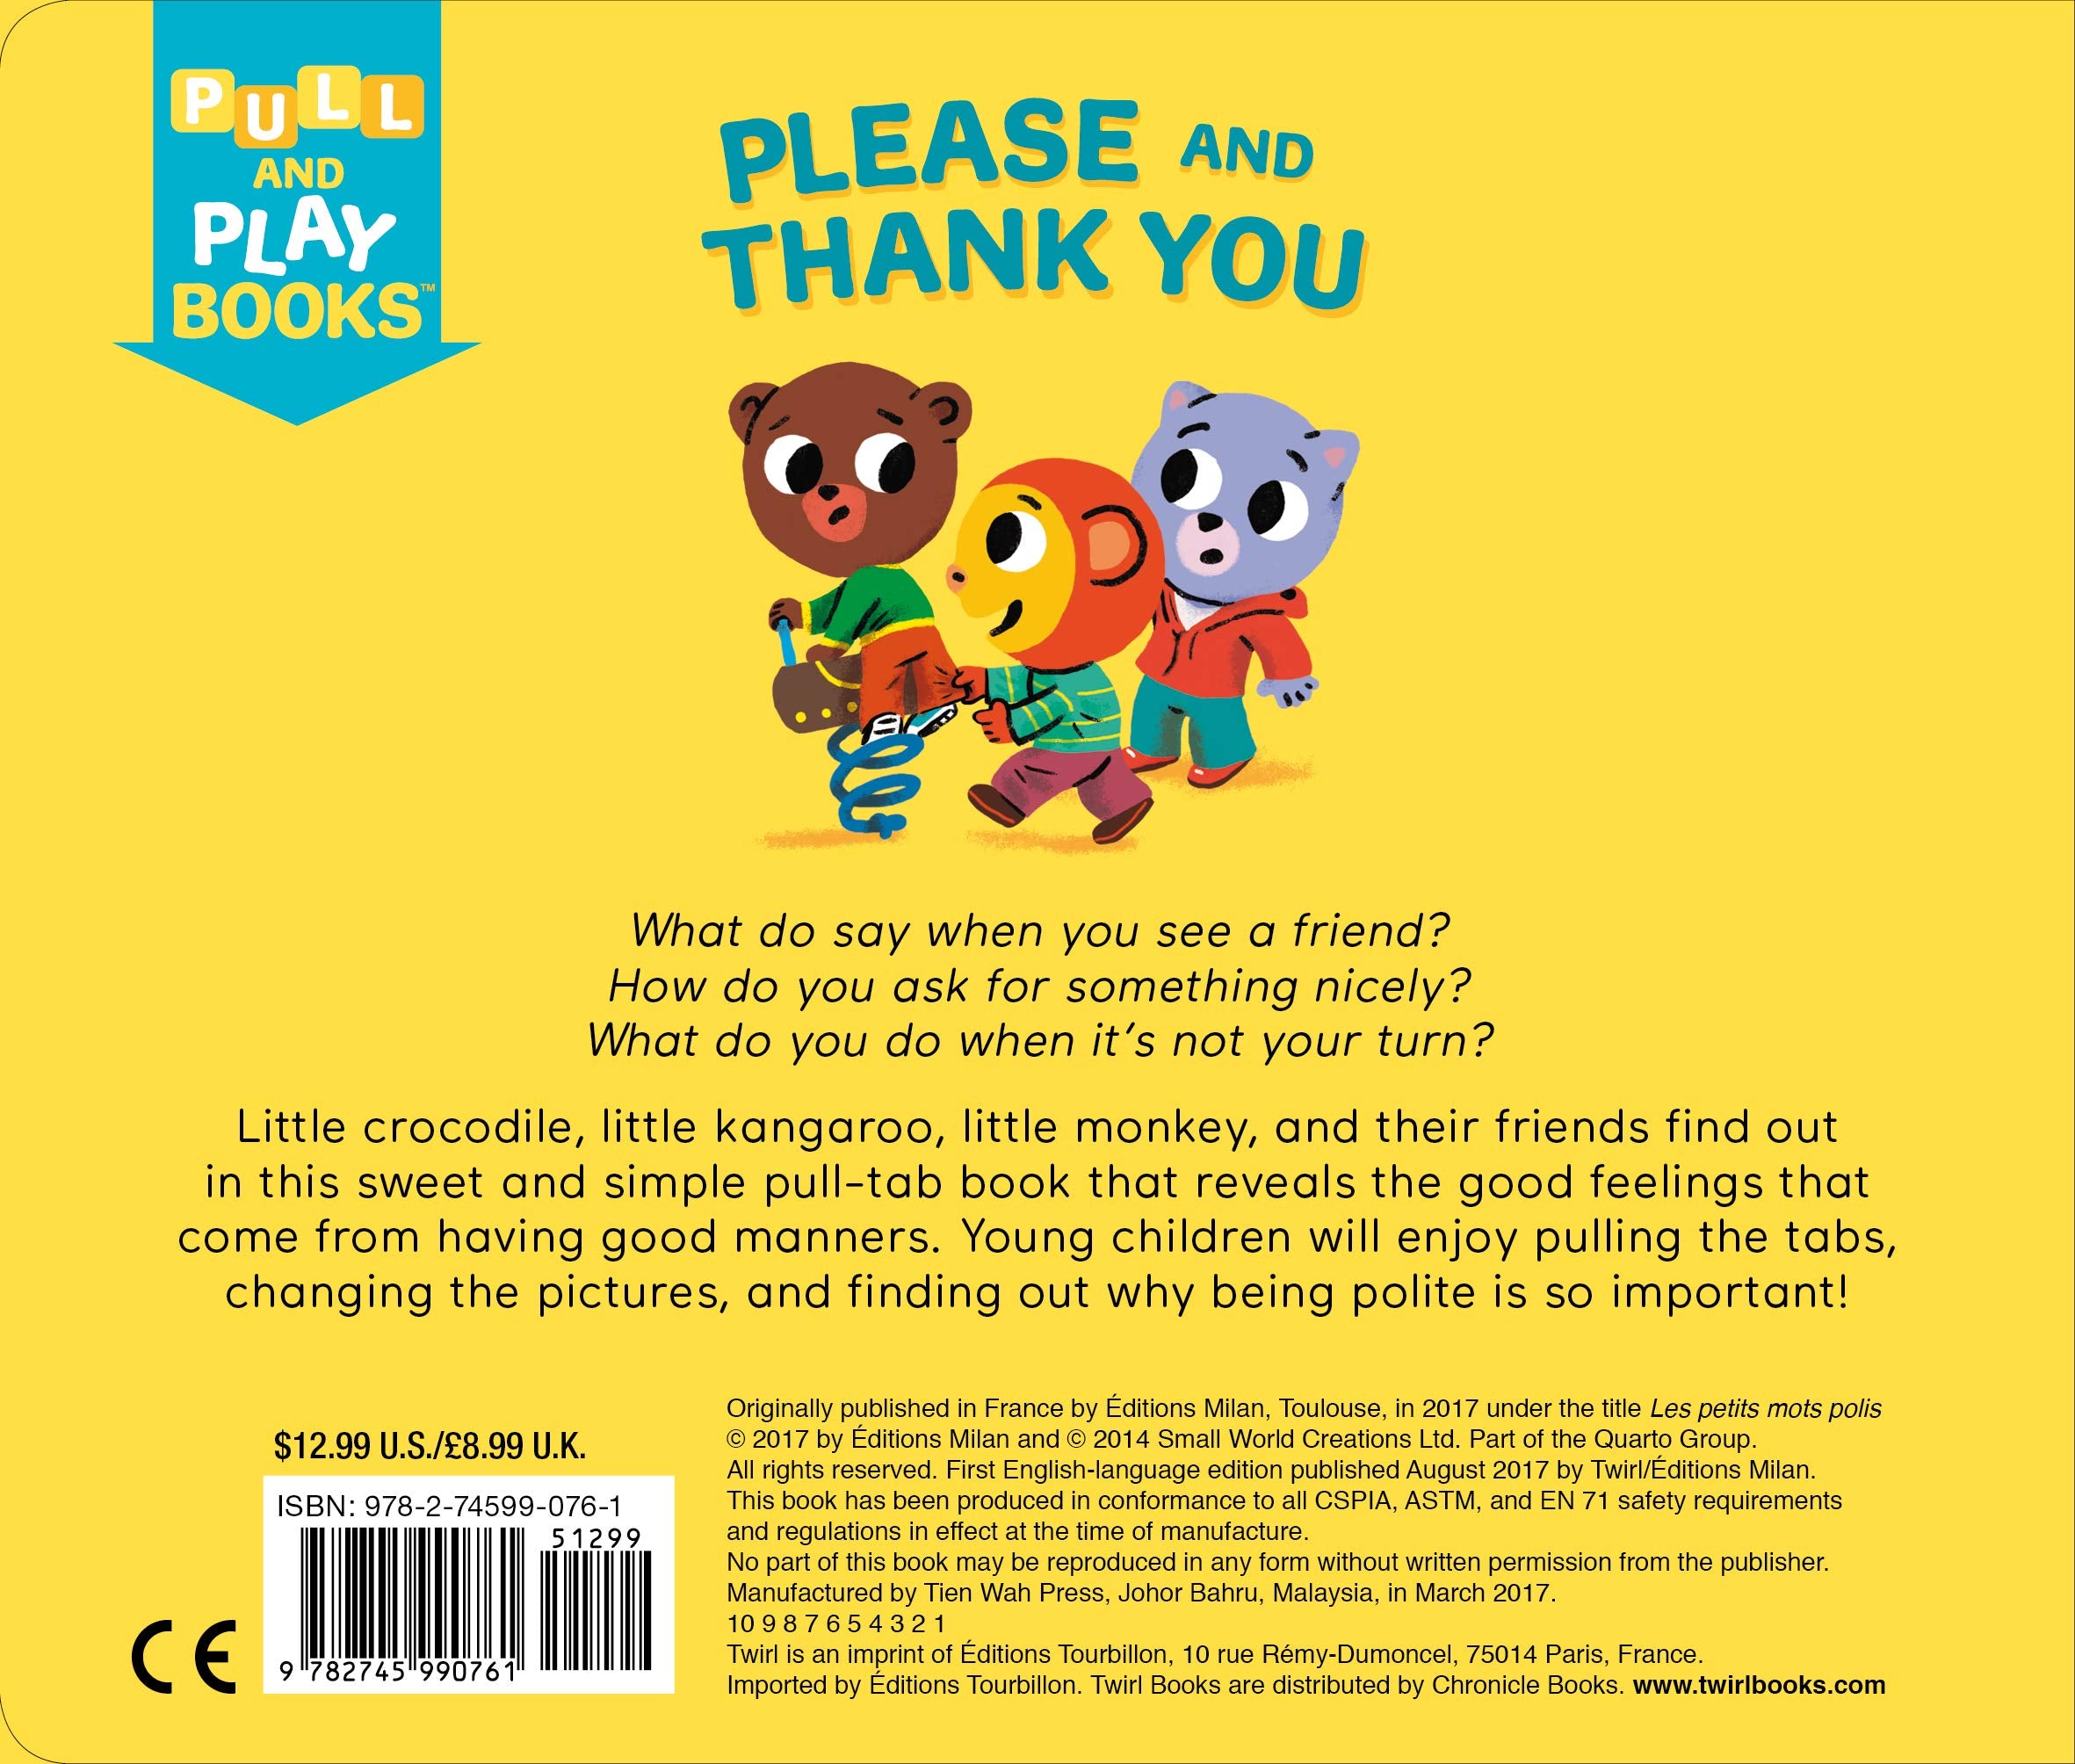 Pull and Play Books : Please and Thank You